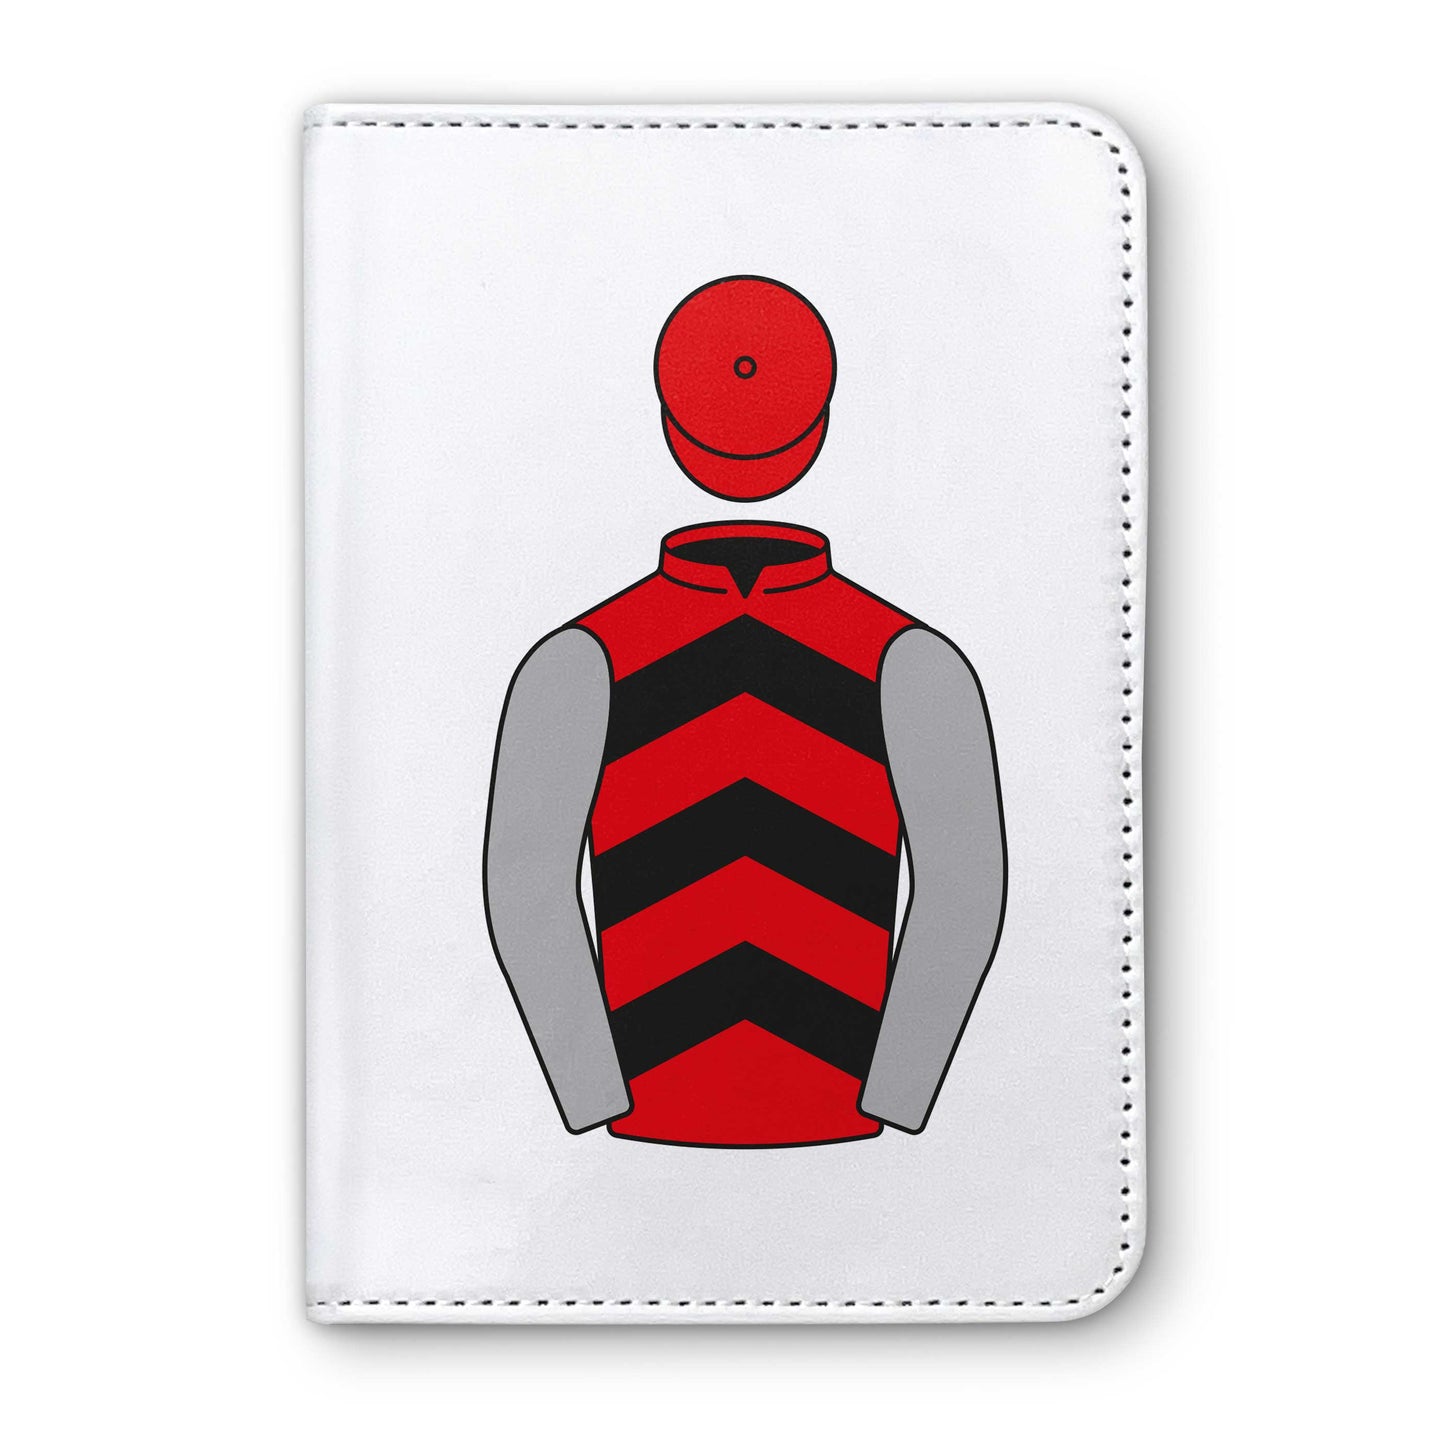 Drew And Ailsa Russell  Horse Racing Passport Holder - Hacked Up Horse Racing Gifts